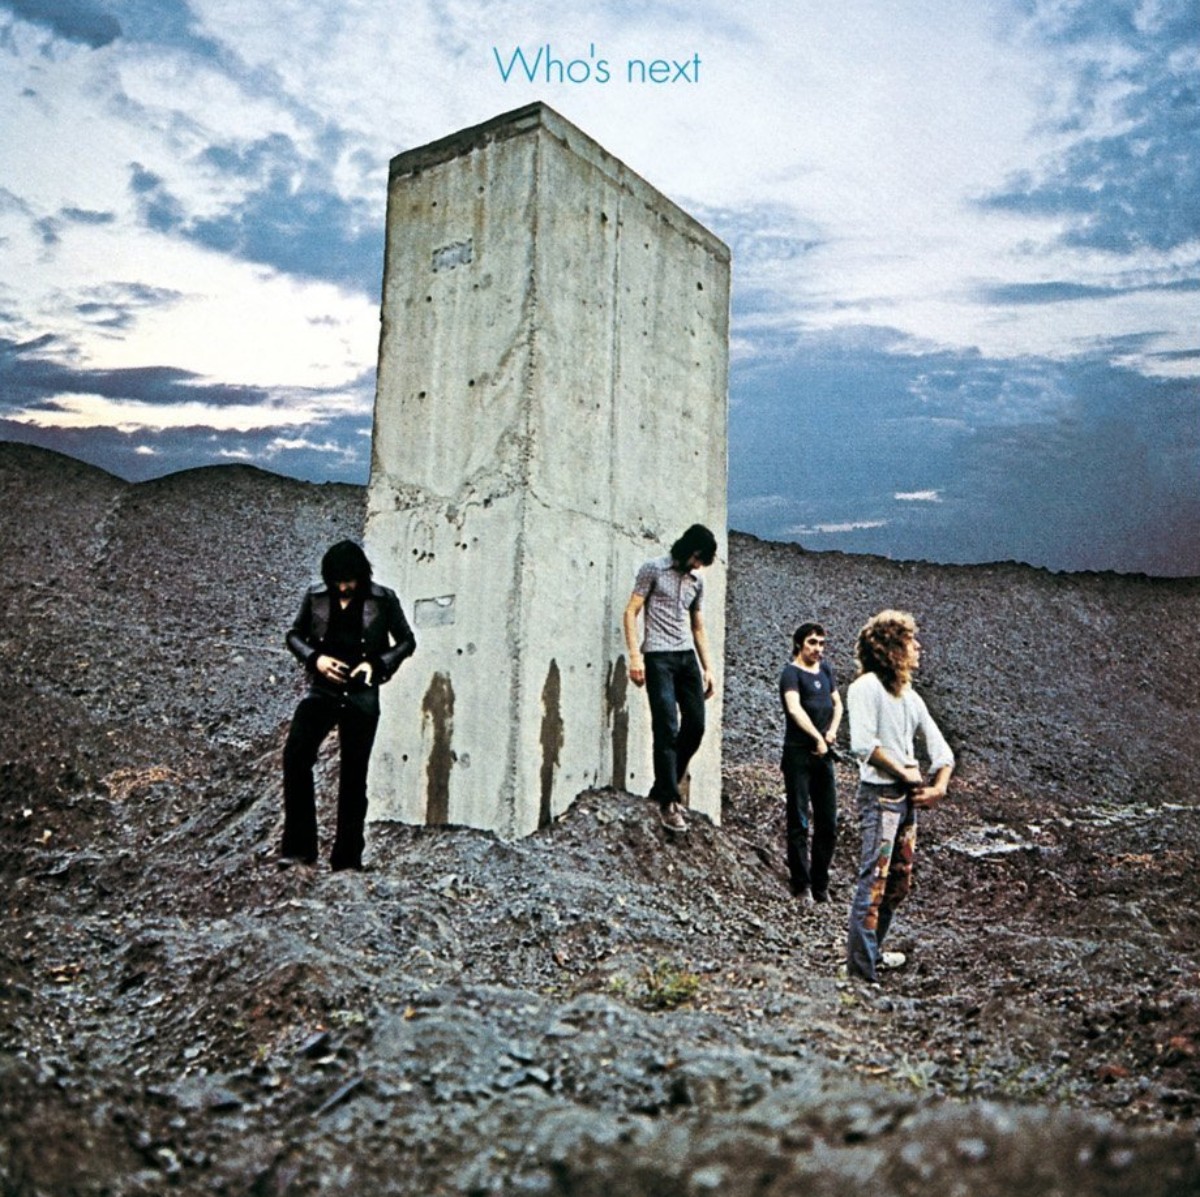 Cover of the album "Who's Next" by The Who